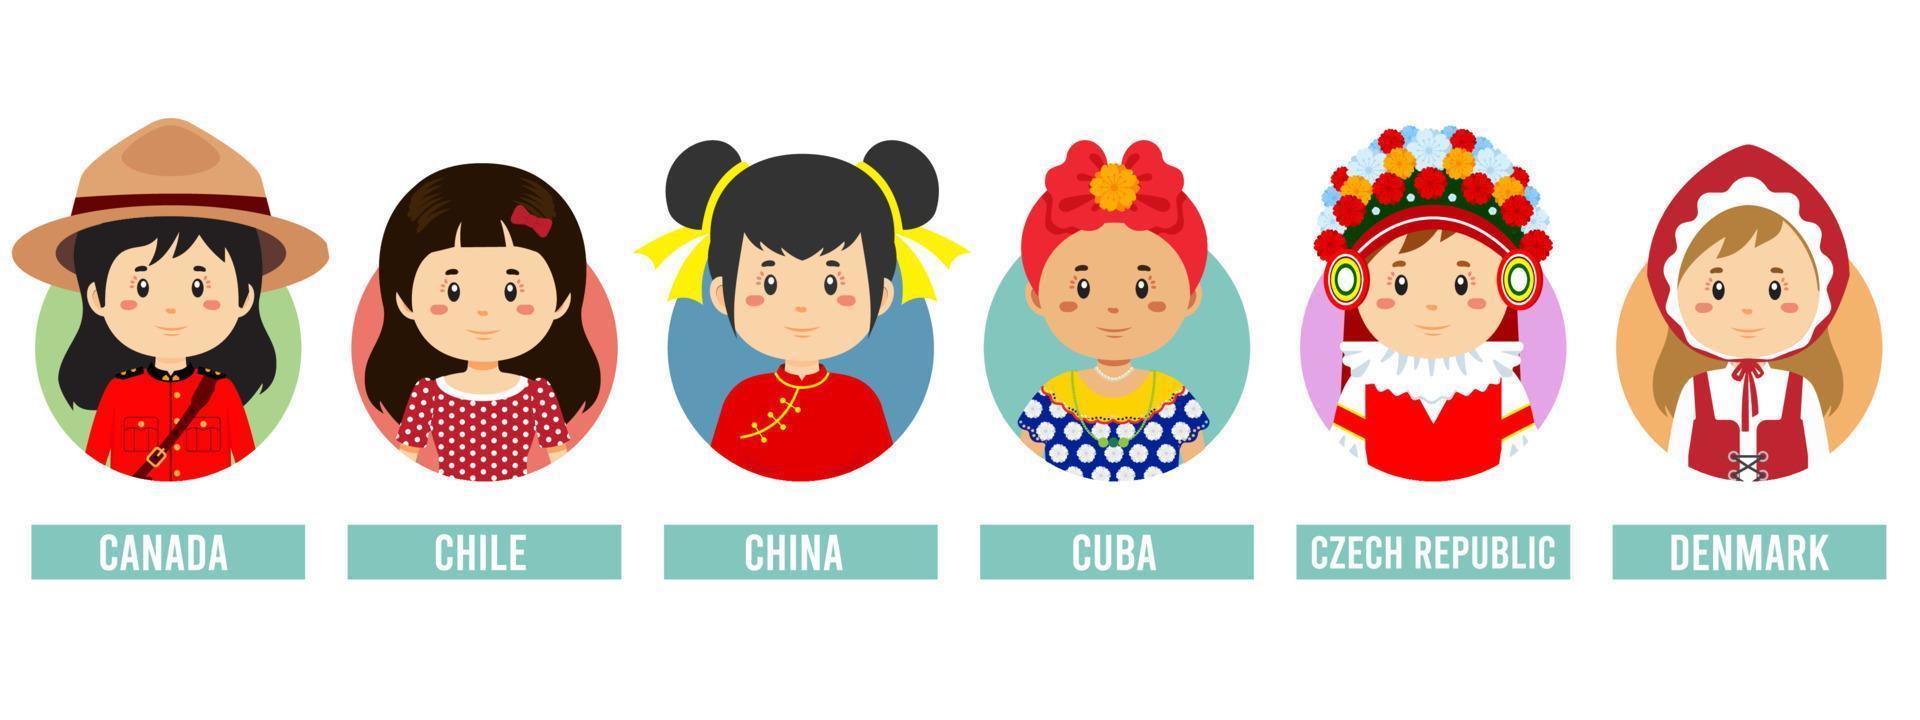 Set Girl Avatars with Different Countries vector